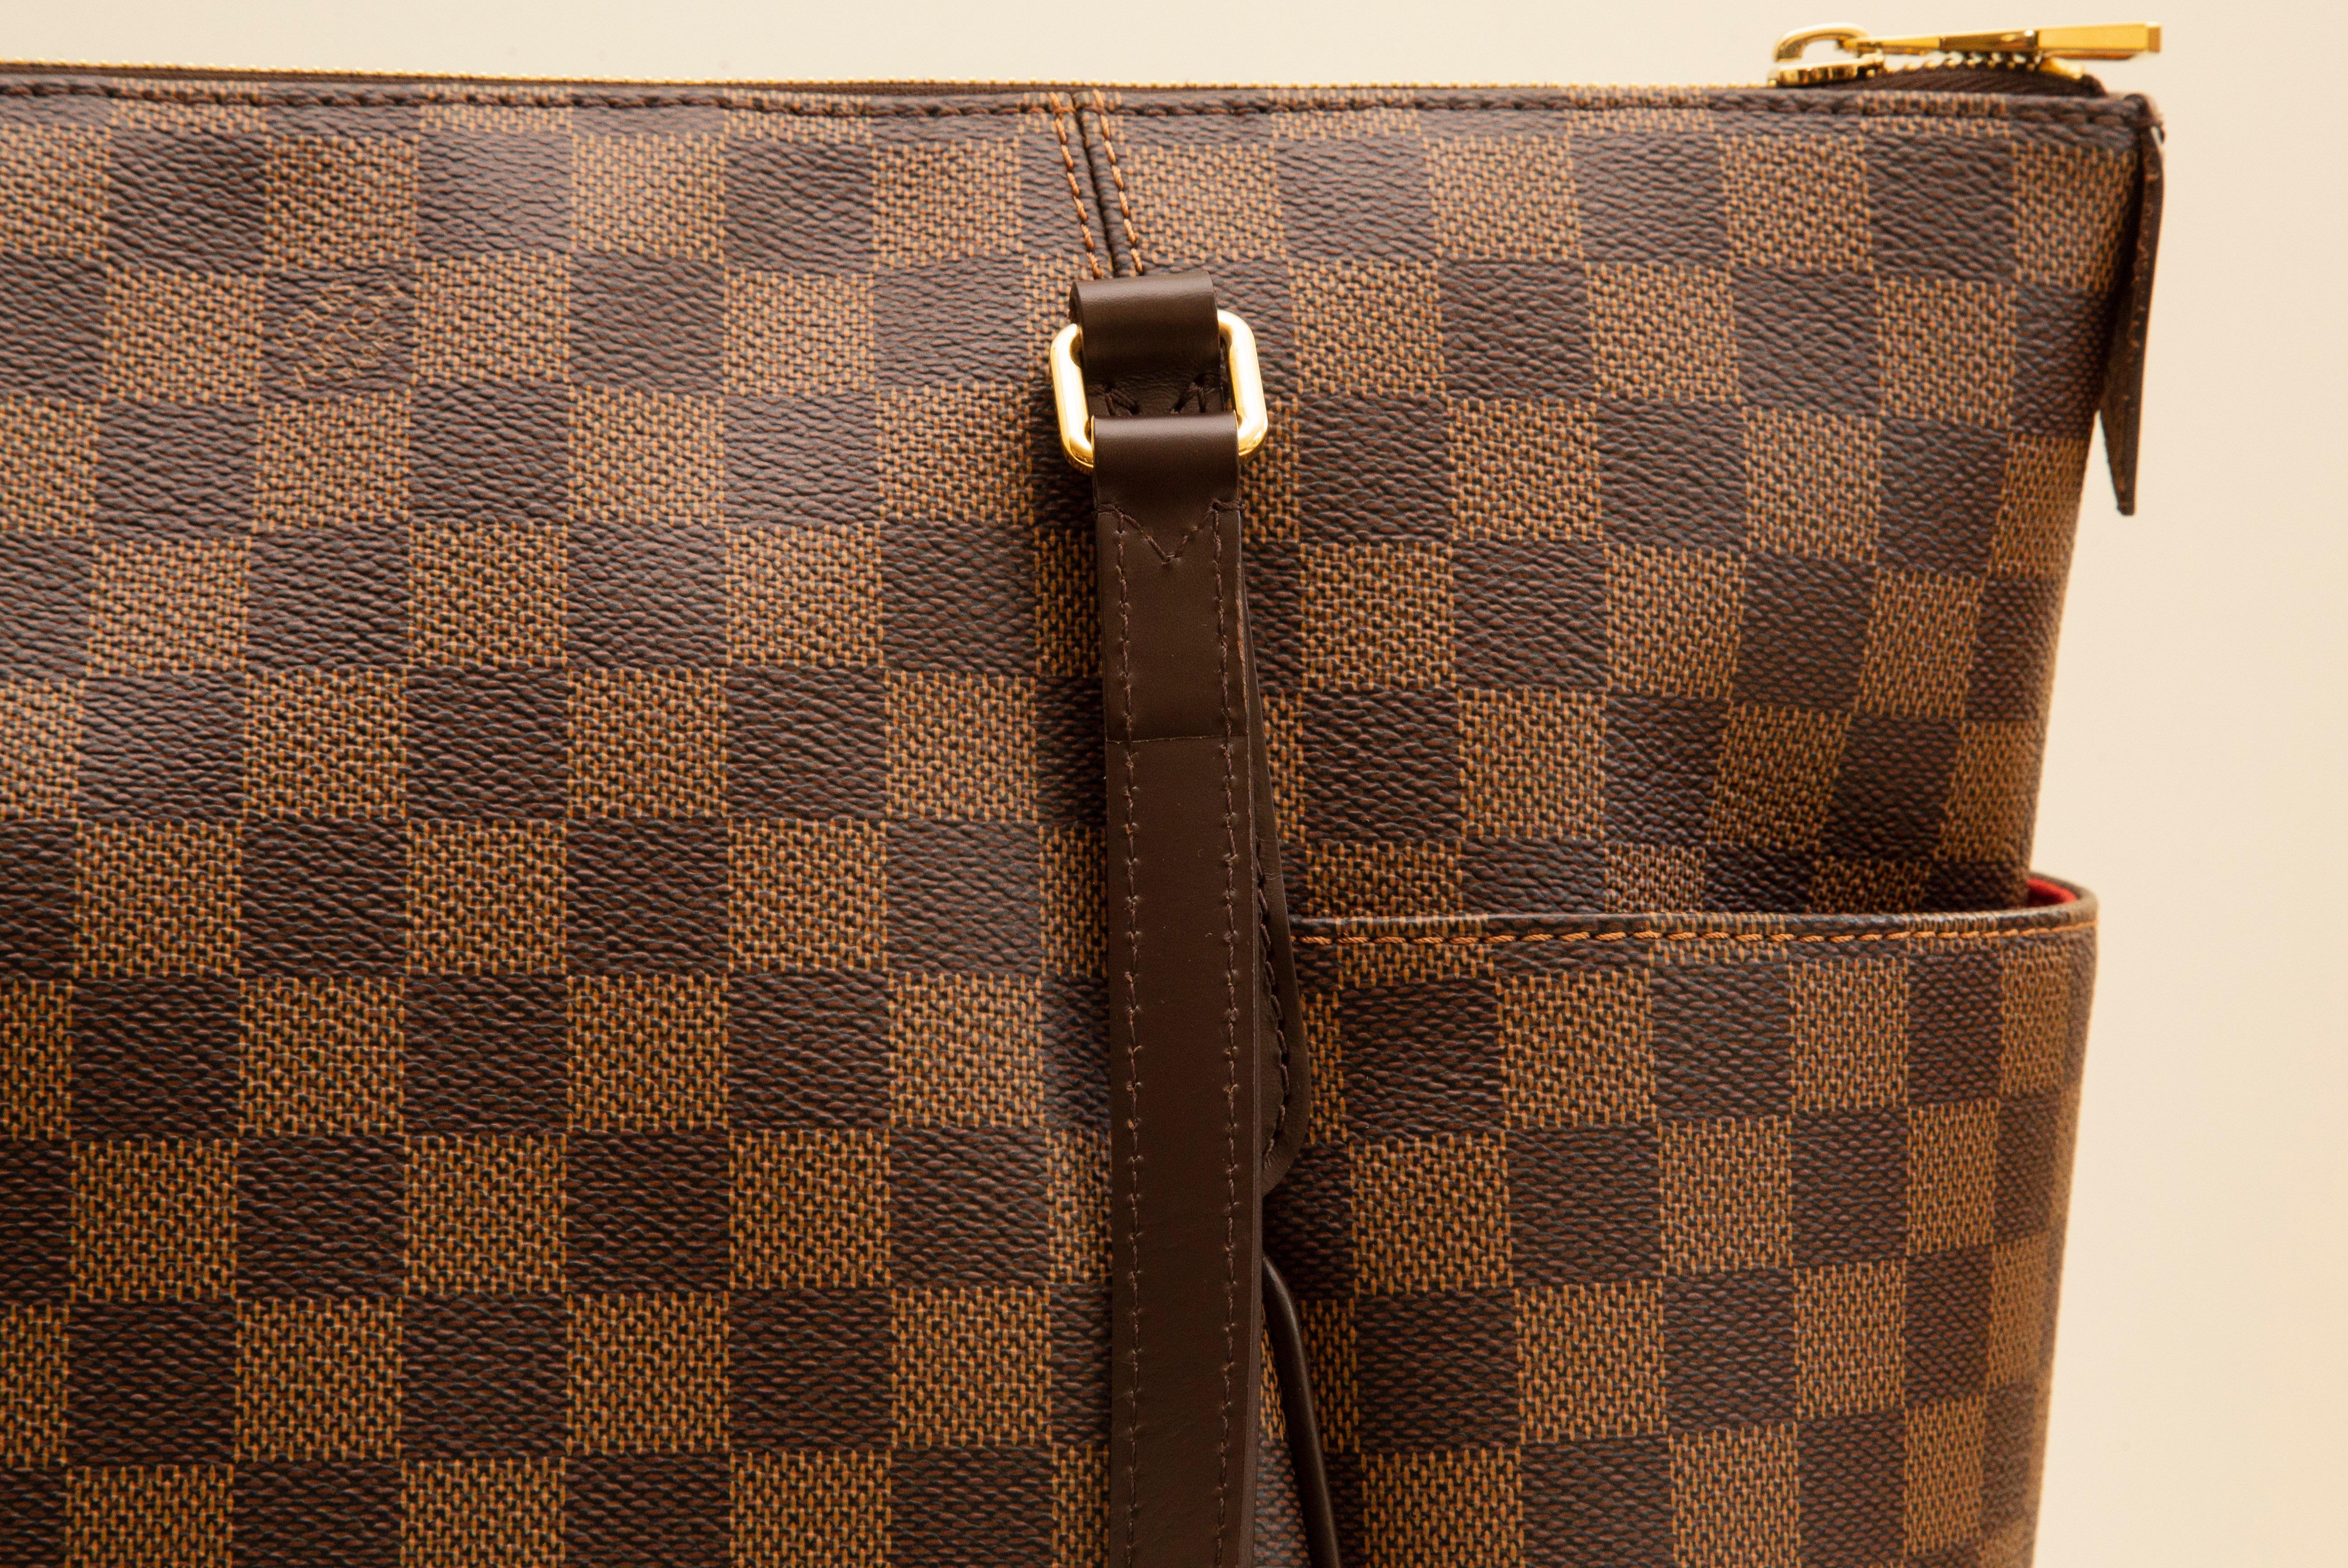 An authentic Louis Vuitton Totally MM In Damier Ebene coated canvas with brown leather trim and gold-toned hardware. Comes with a dustbag and cards. In very good condition, hardly worn, discontinued, and sold out.